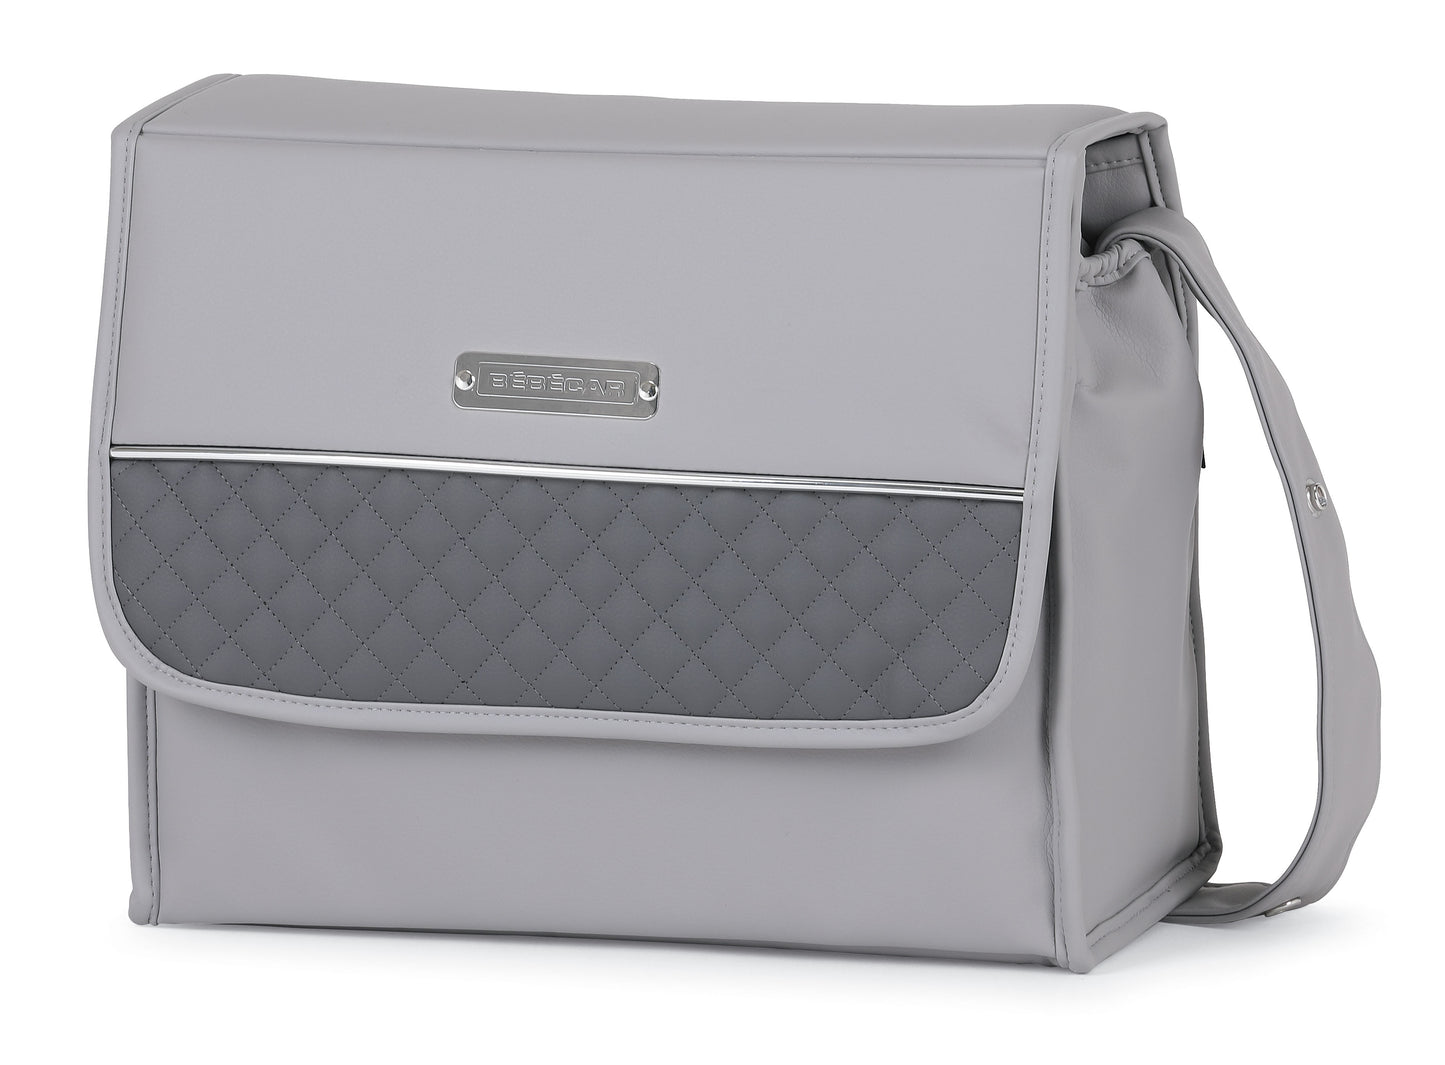 DUO Ip-Op XL Classic Combination Pewter - 8 Week Delivery